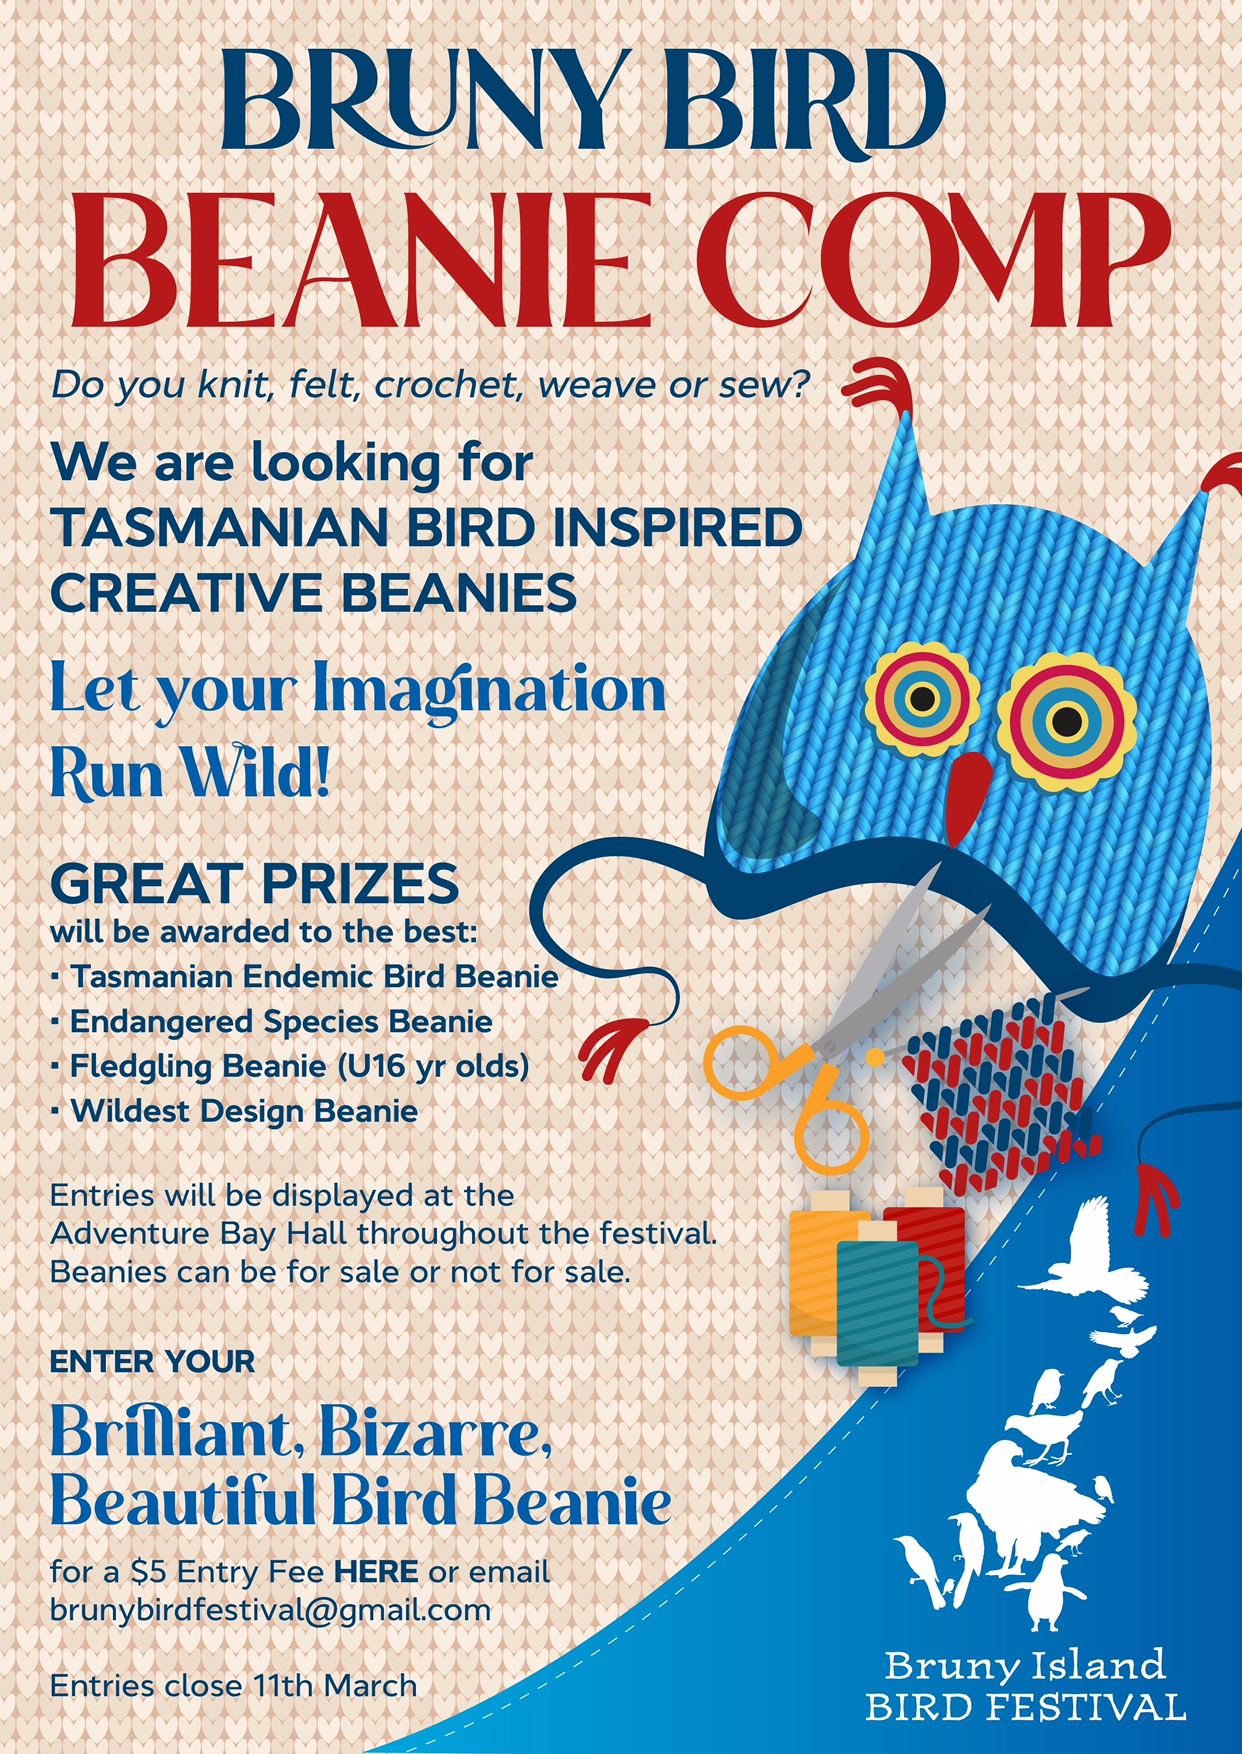 Bruny Bird Beanie Competition 2022